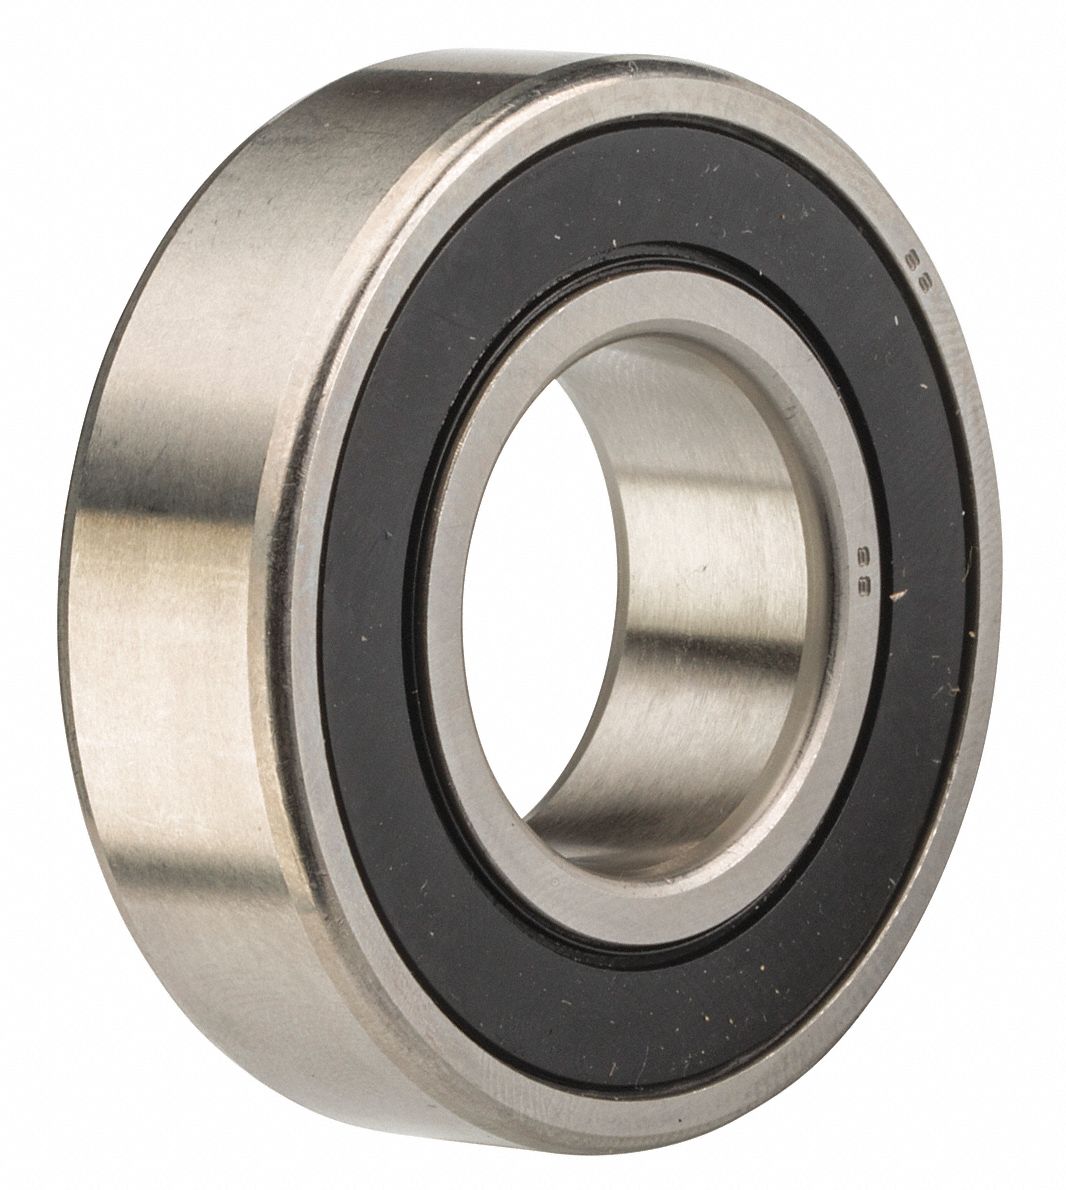 Radial Ball Bearing: 12 mm Bore Dia., 28 mm Outside Dia., 8 mm Wd, Double Sealed